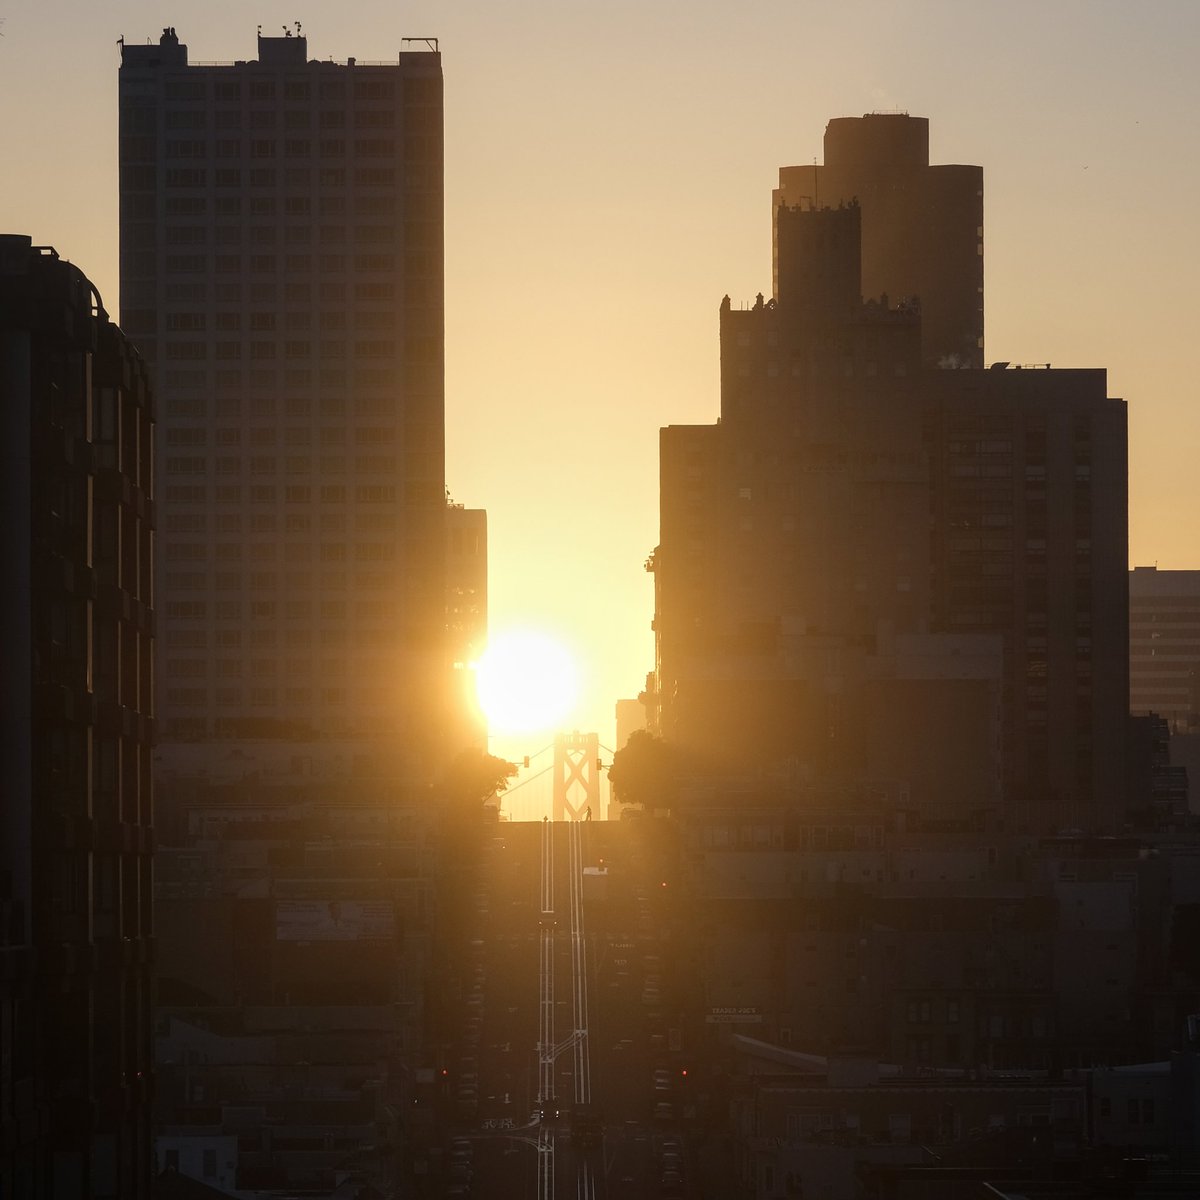 California Henge, when the sunrise aligns with California street, twice a year. With no fog this time! #californiahenge #sanfrancisco